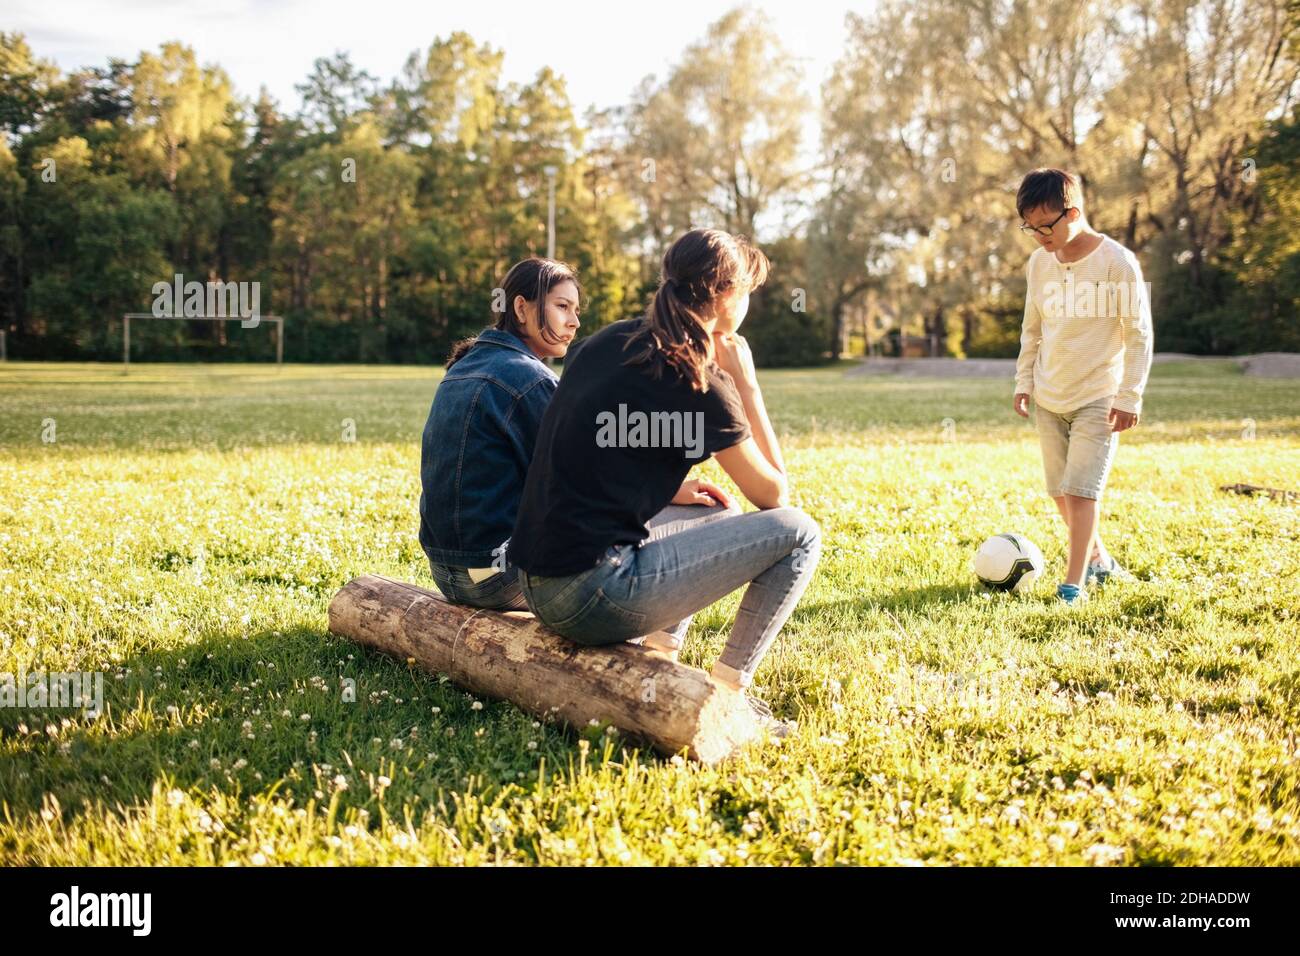 Sisters sitting on log while boy playing with ball at park during sunny day Stock Photo